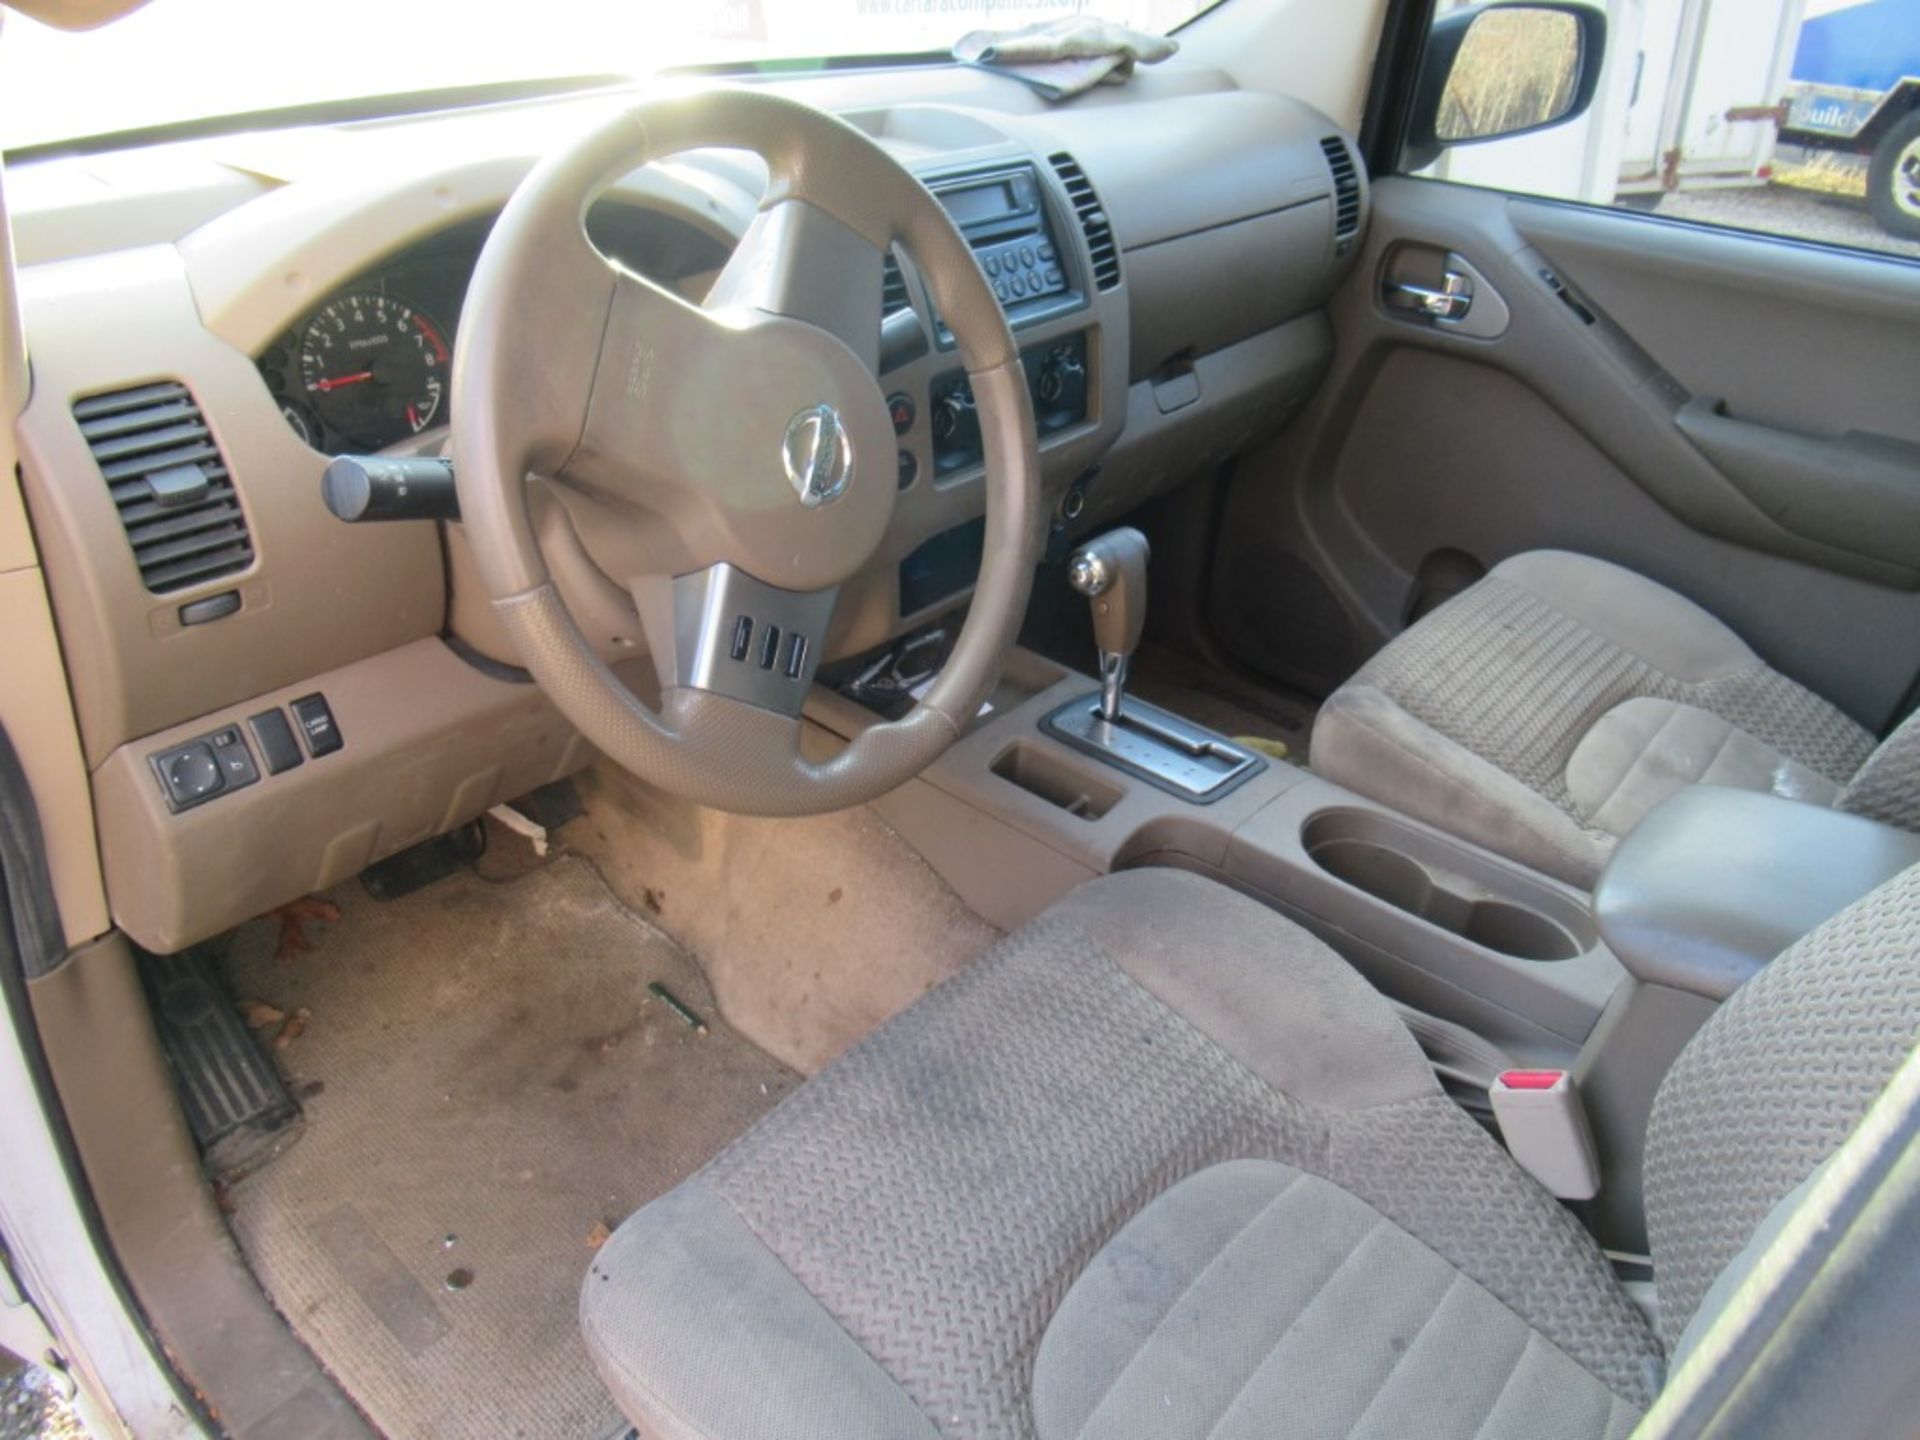 Wrecked 2005 Nissan Frontier Pickup, VIN 1NGAD06U05C427927, Extended Cab, Automatic, Cruise Control, - Image 15 of 20